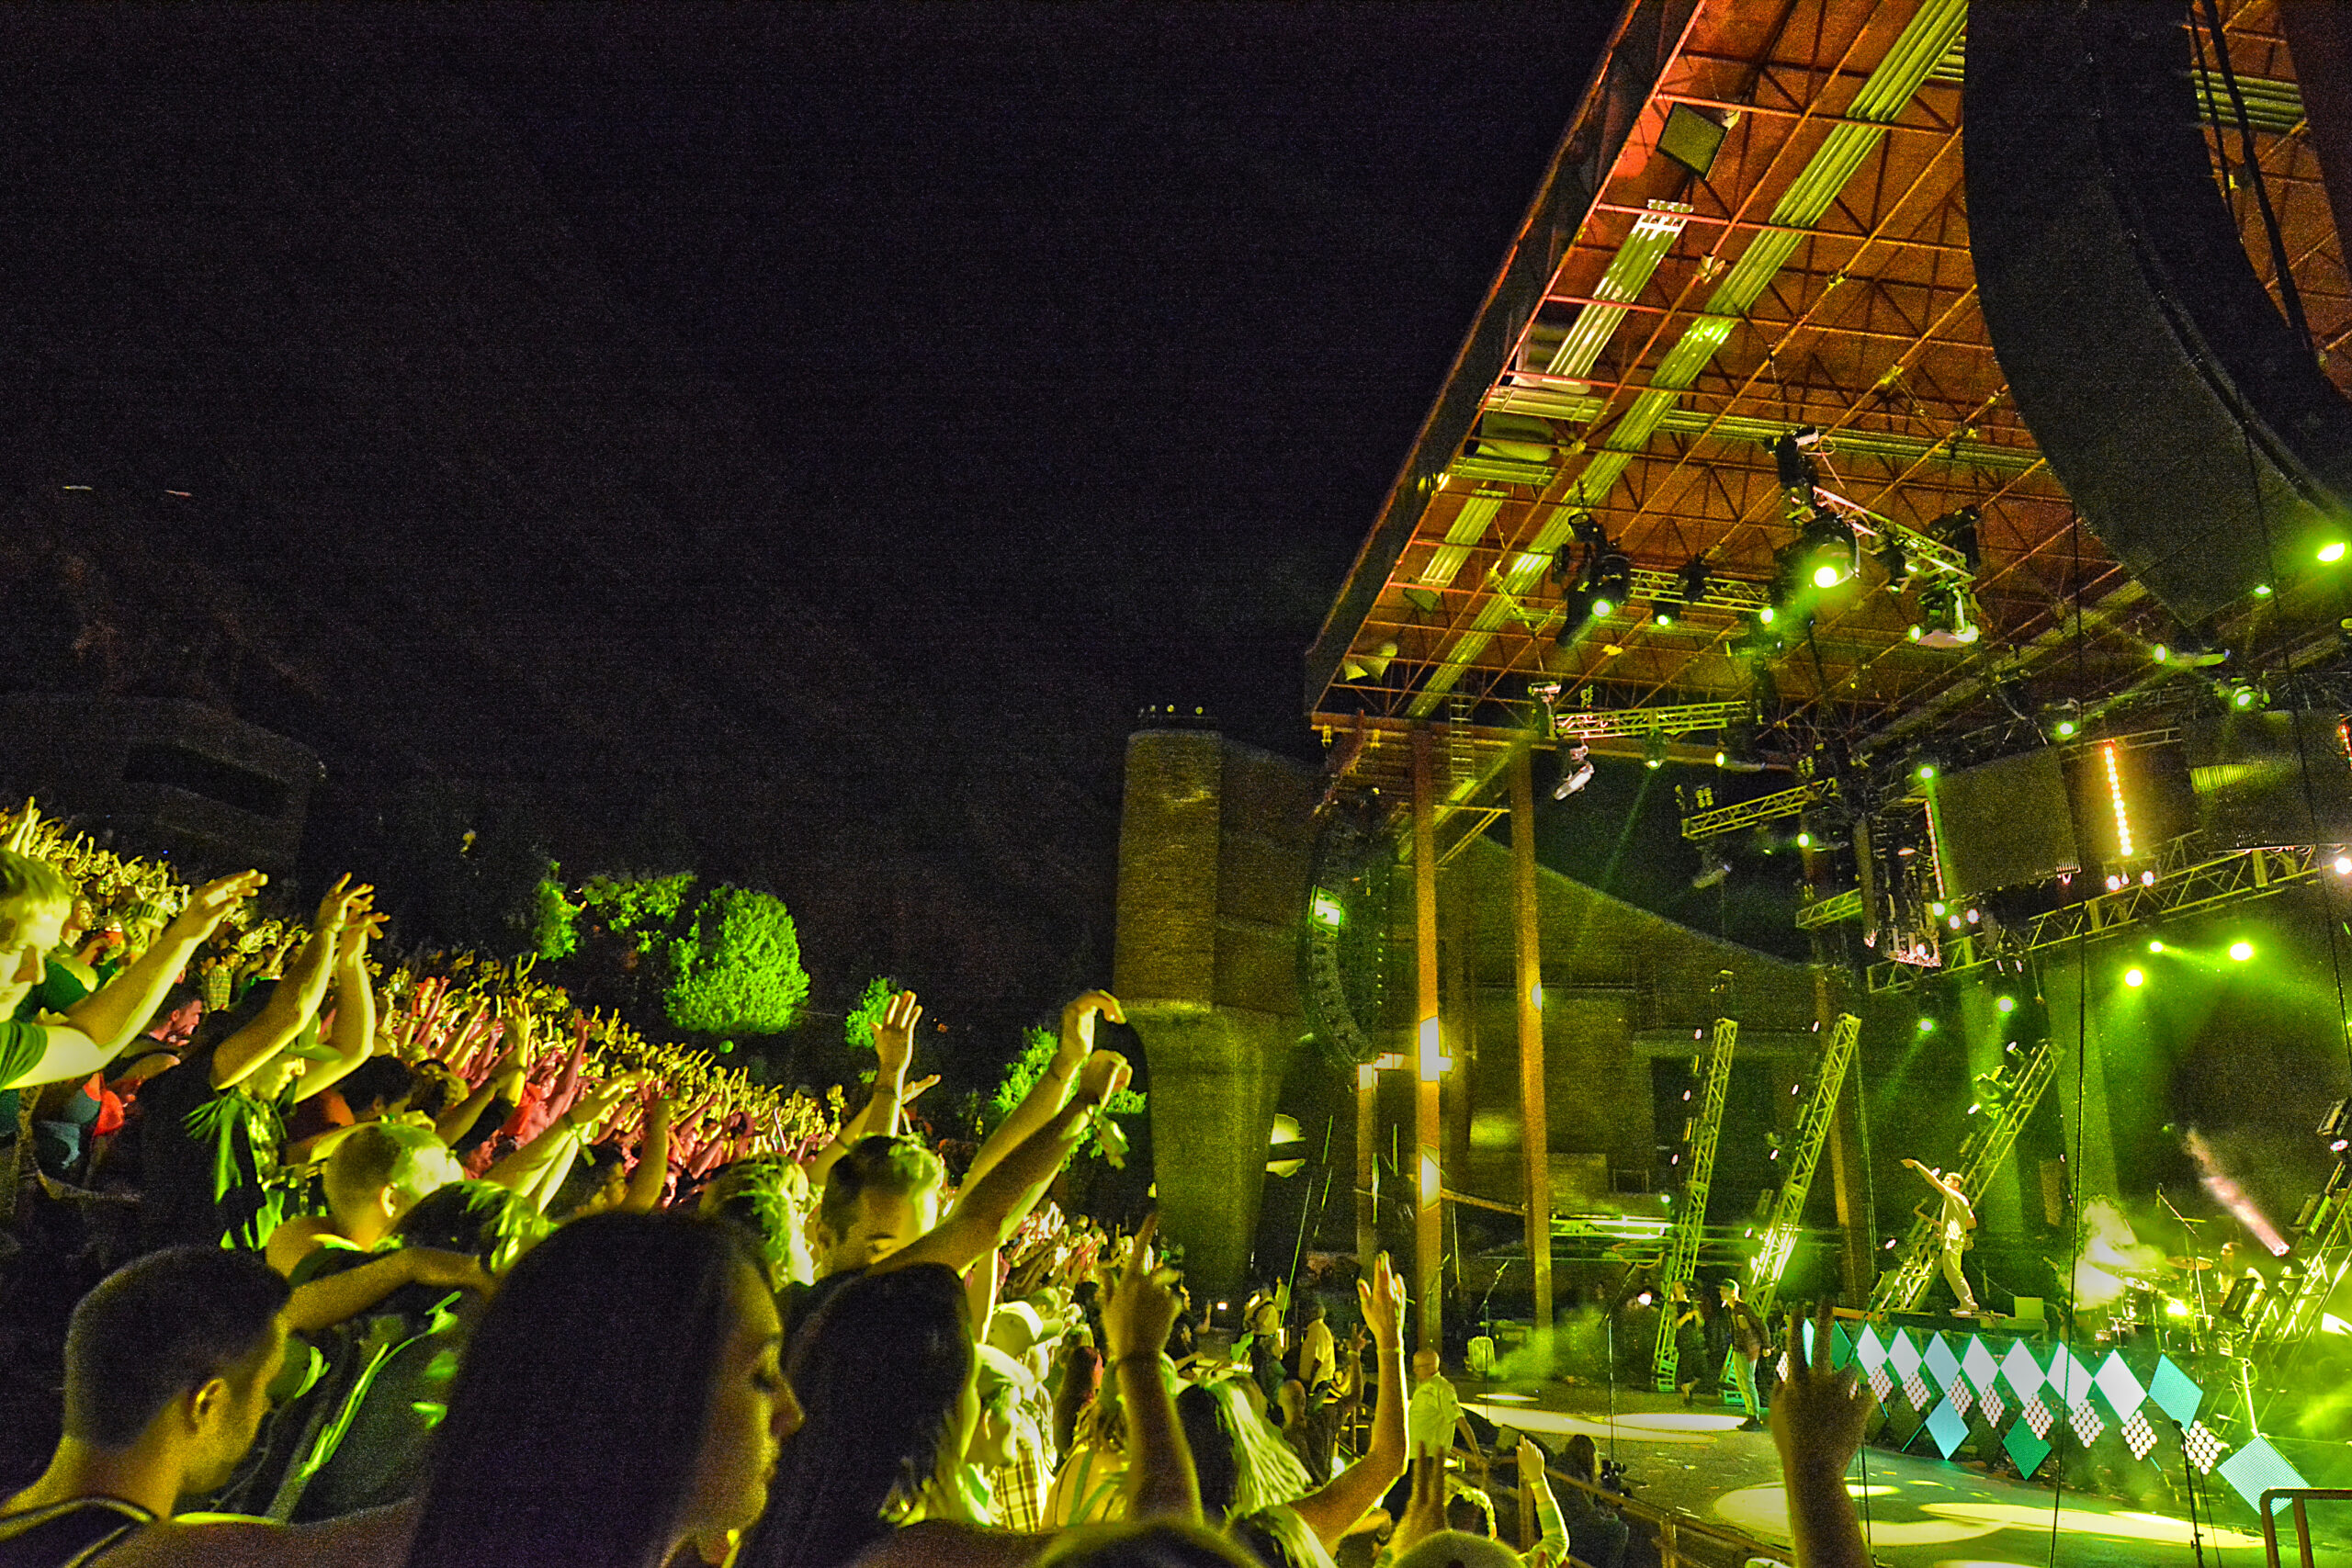 Big Gigantic performing at Rowdytown 3 at Red Rocks Amphitheatre. Photo by: Matthew McGuire